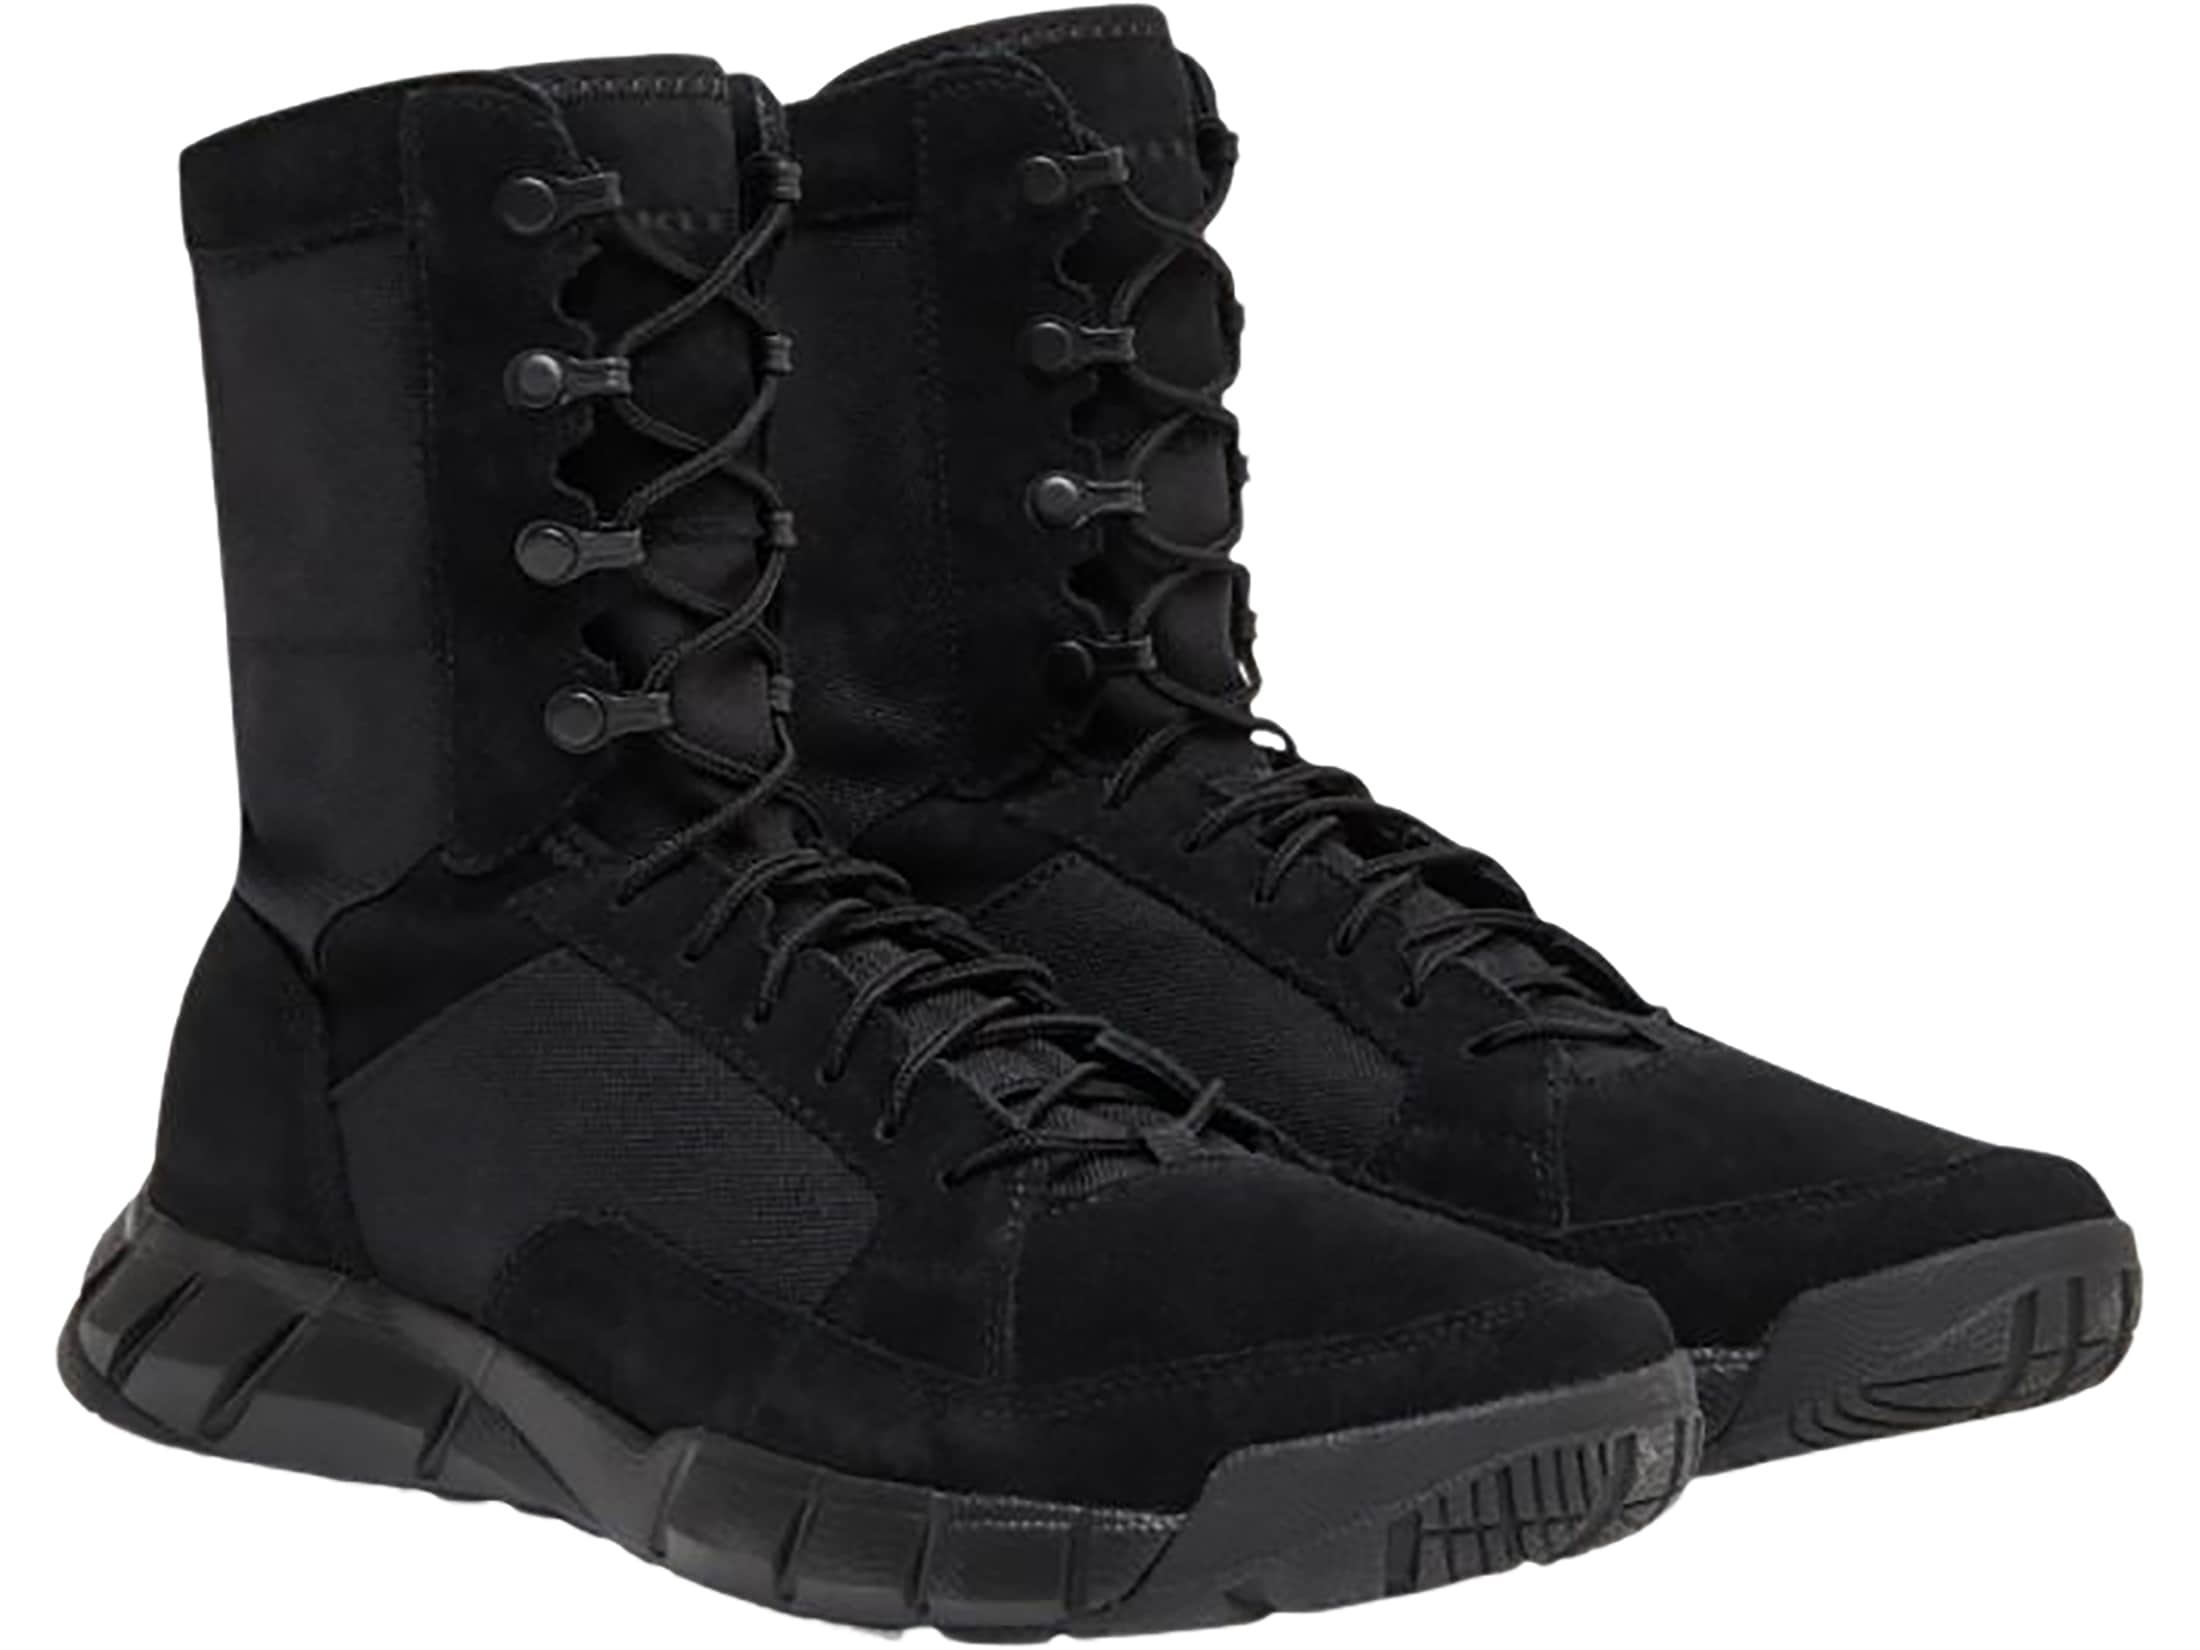 Oakley Light Assault 2 8 Tactical Boots Leather Synthetic Blackout